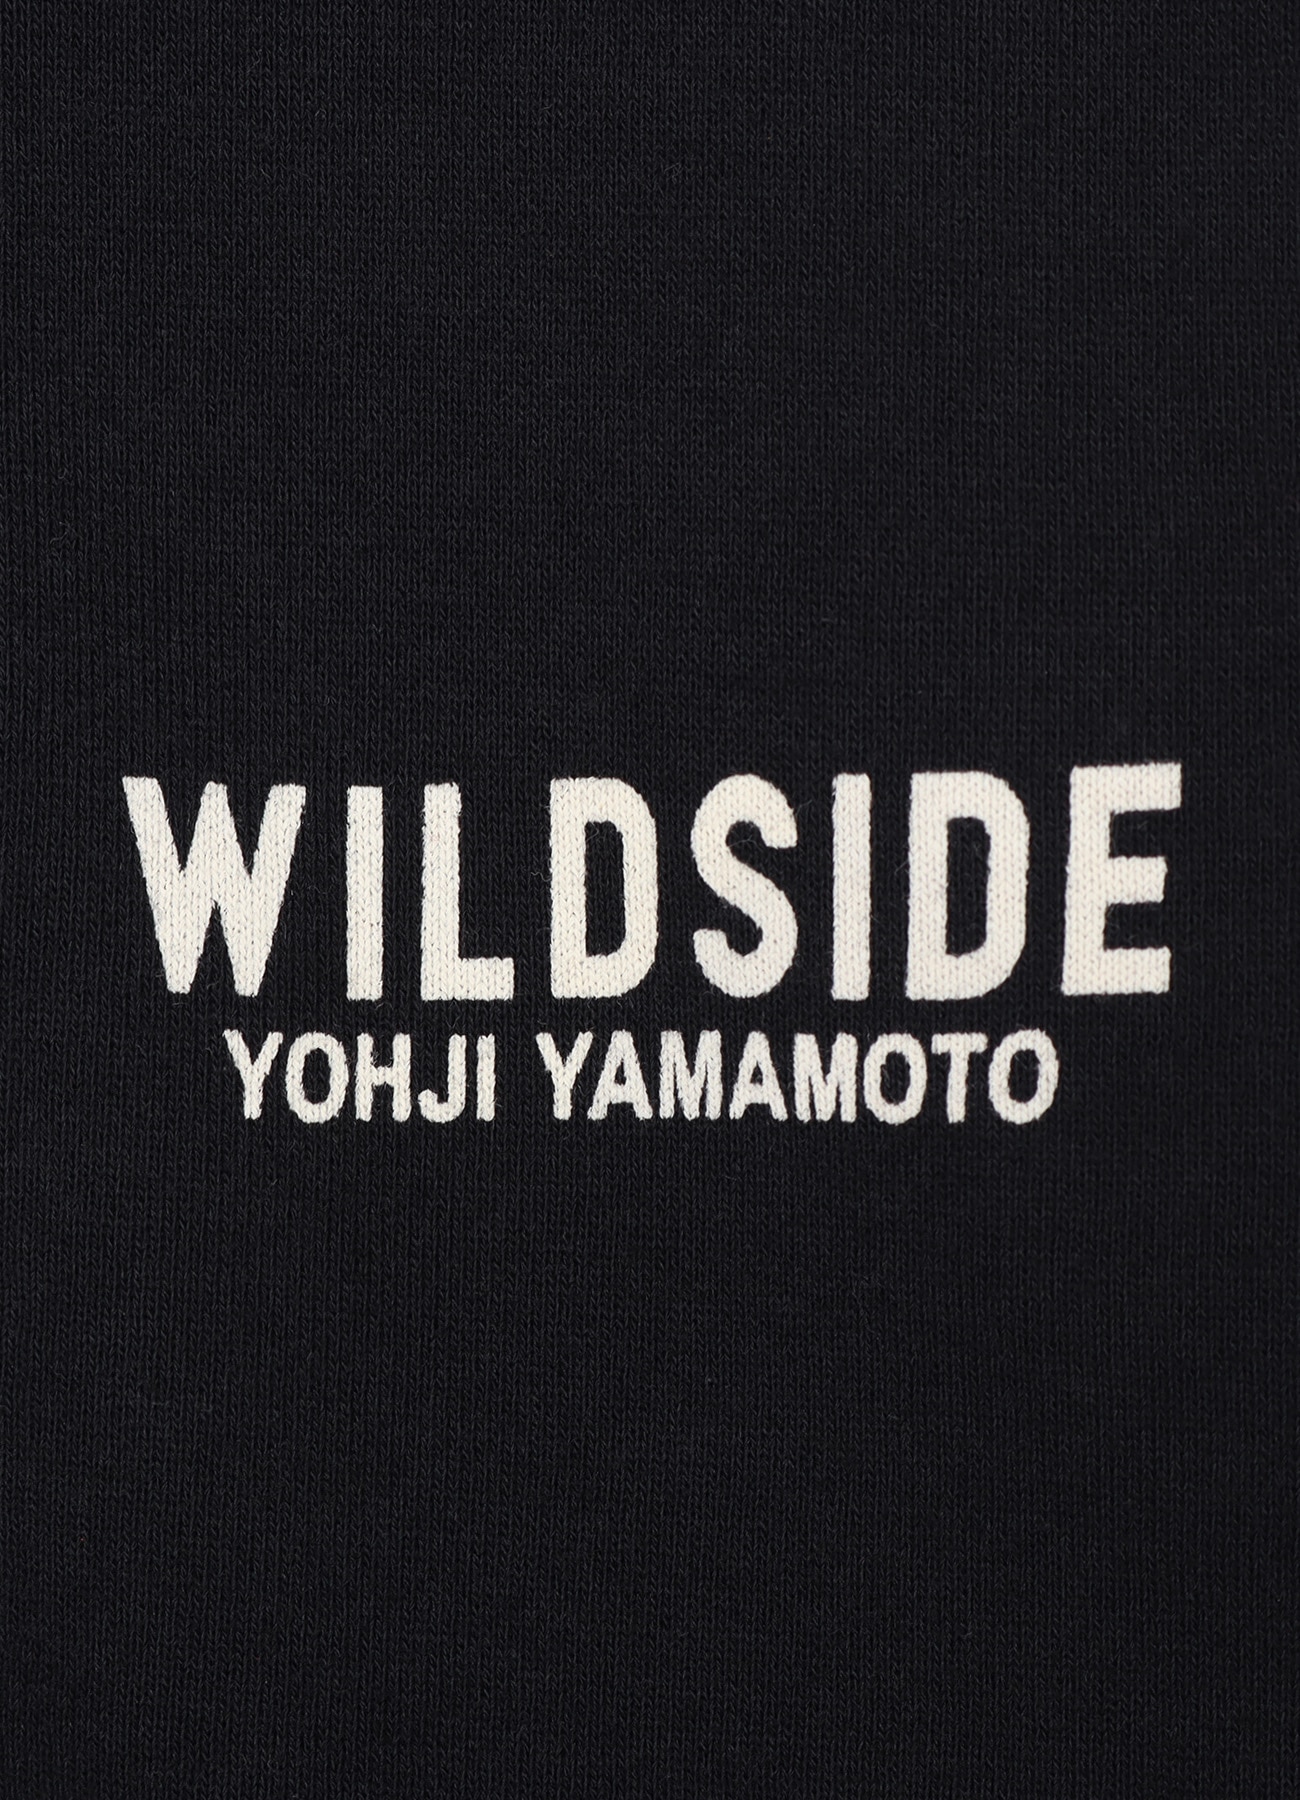 WILDSIDE × HYSTERIC GLAMOUR 